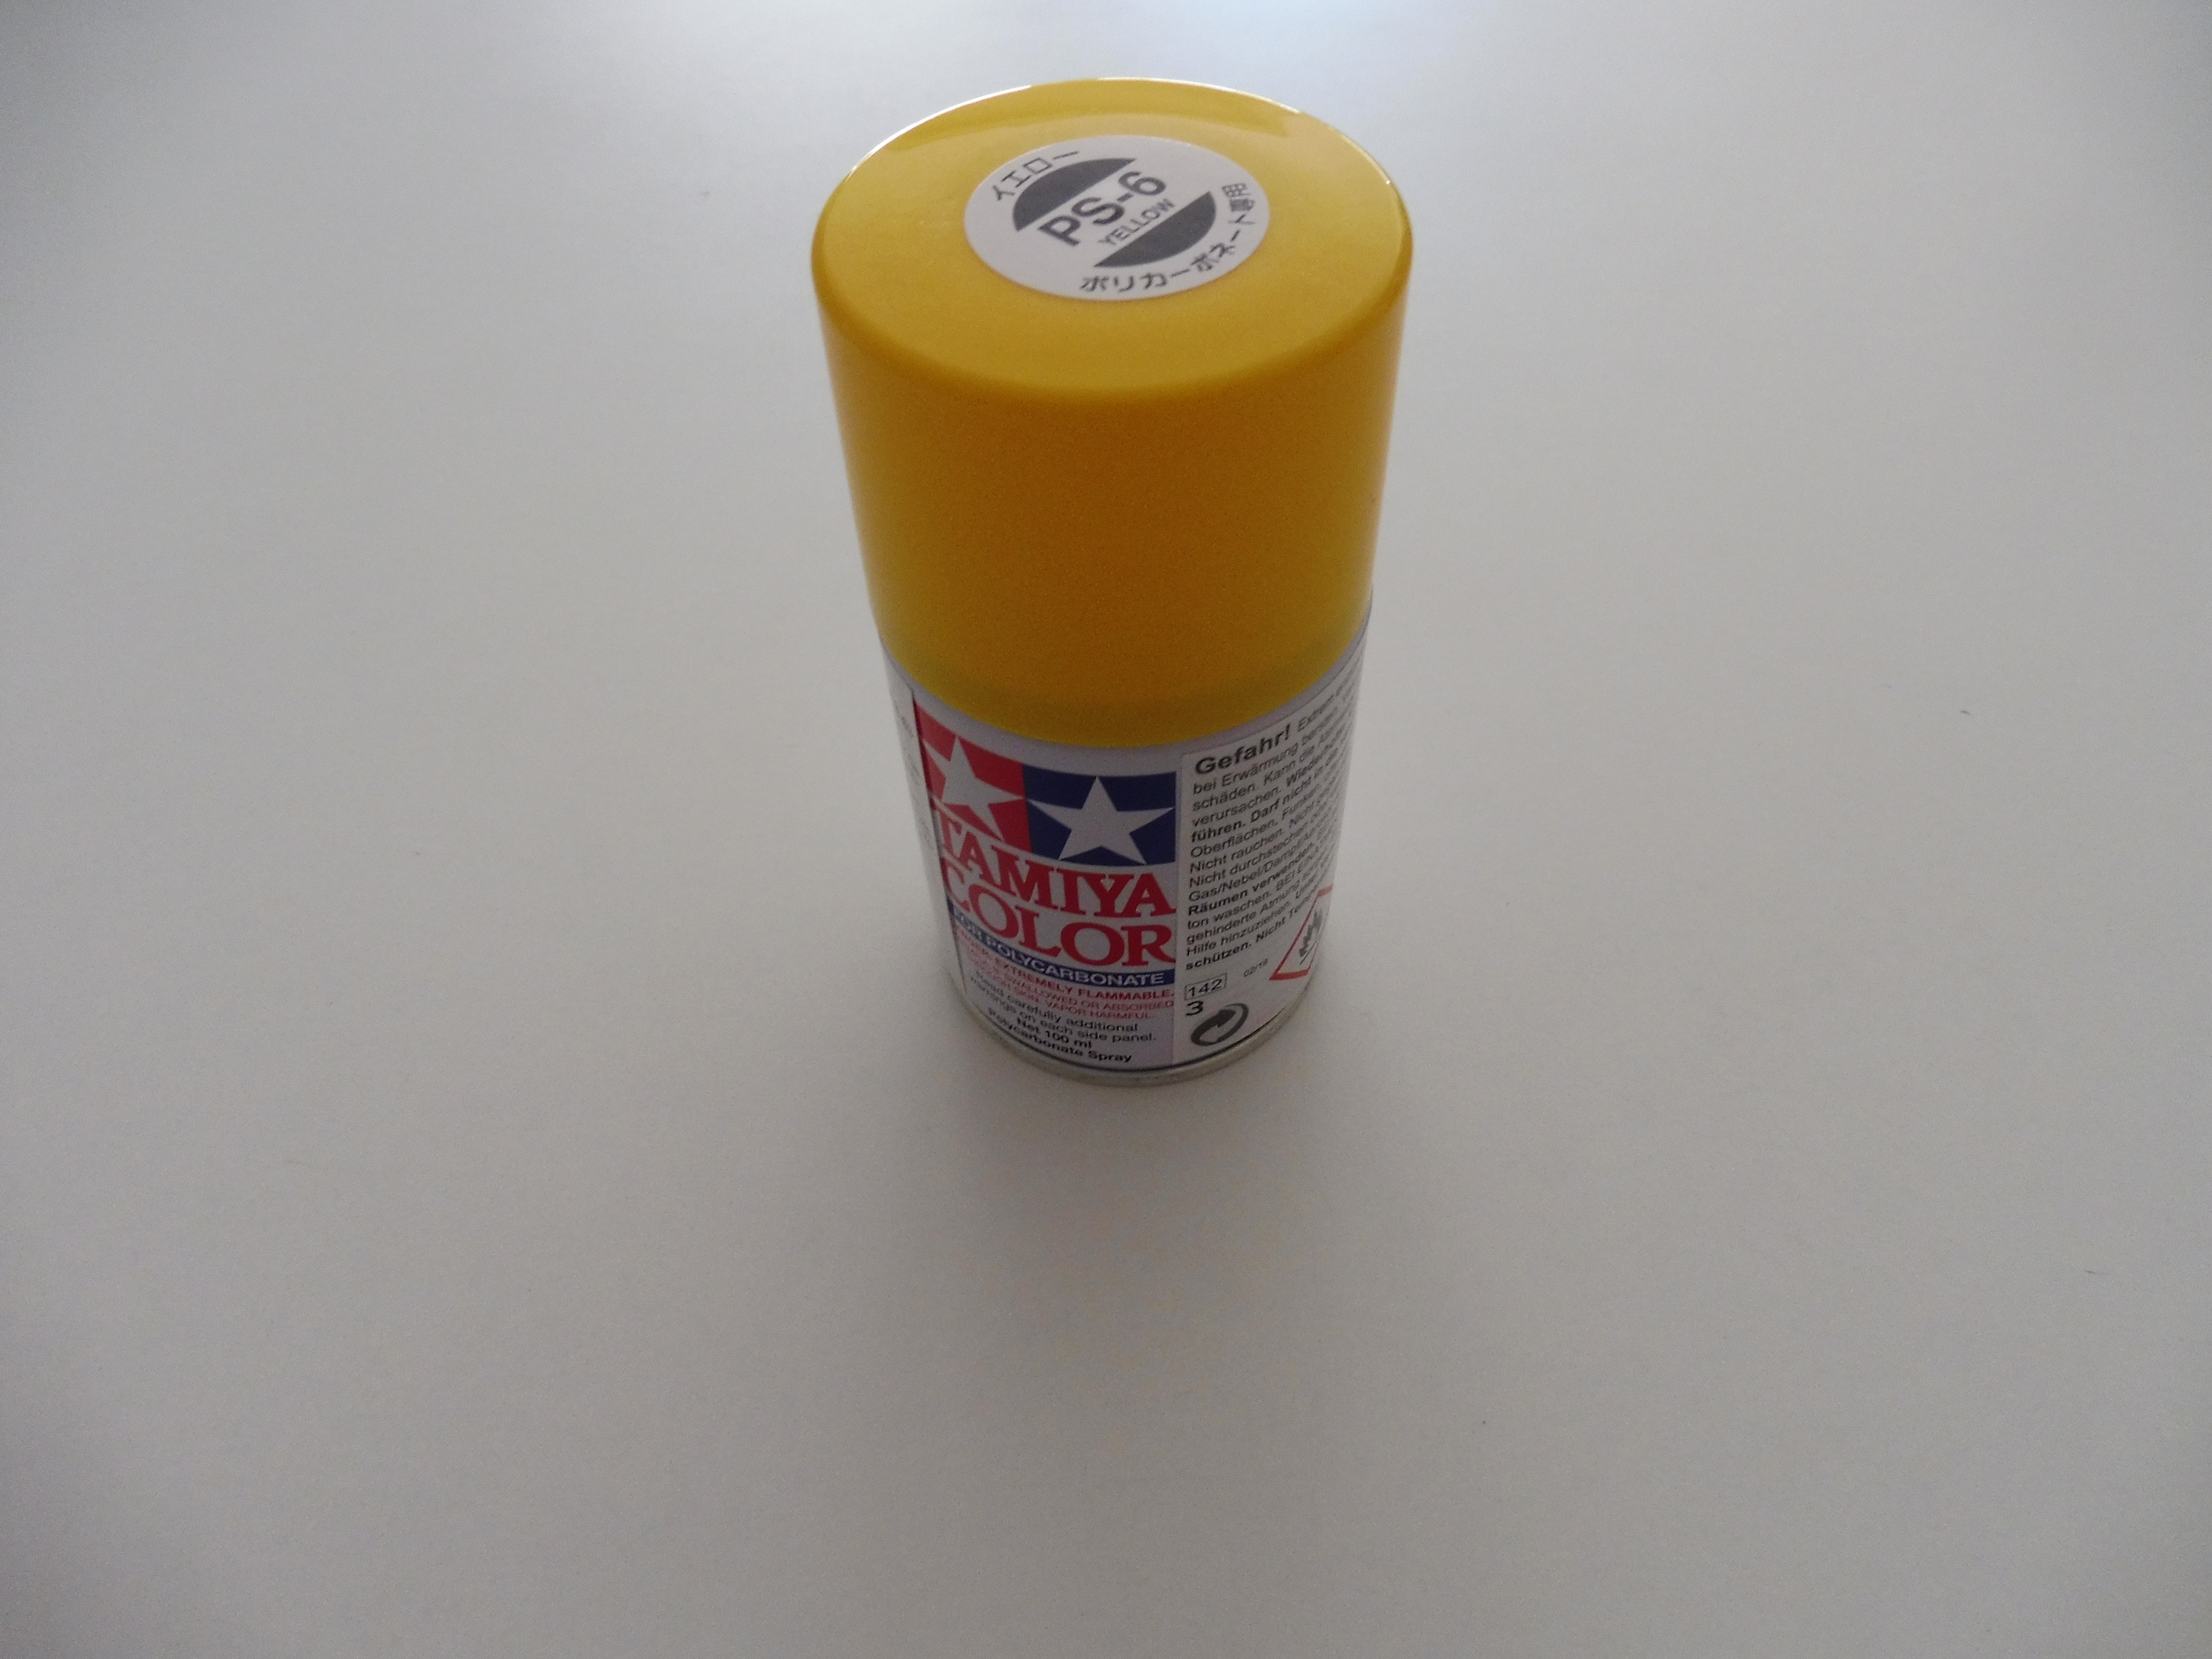 Tamiya PS-Polycarbonate Colors Spray Cans